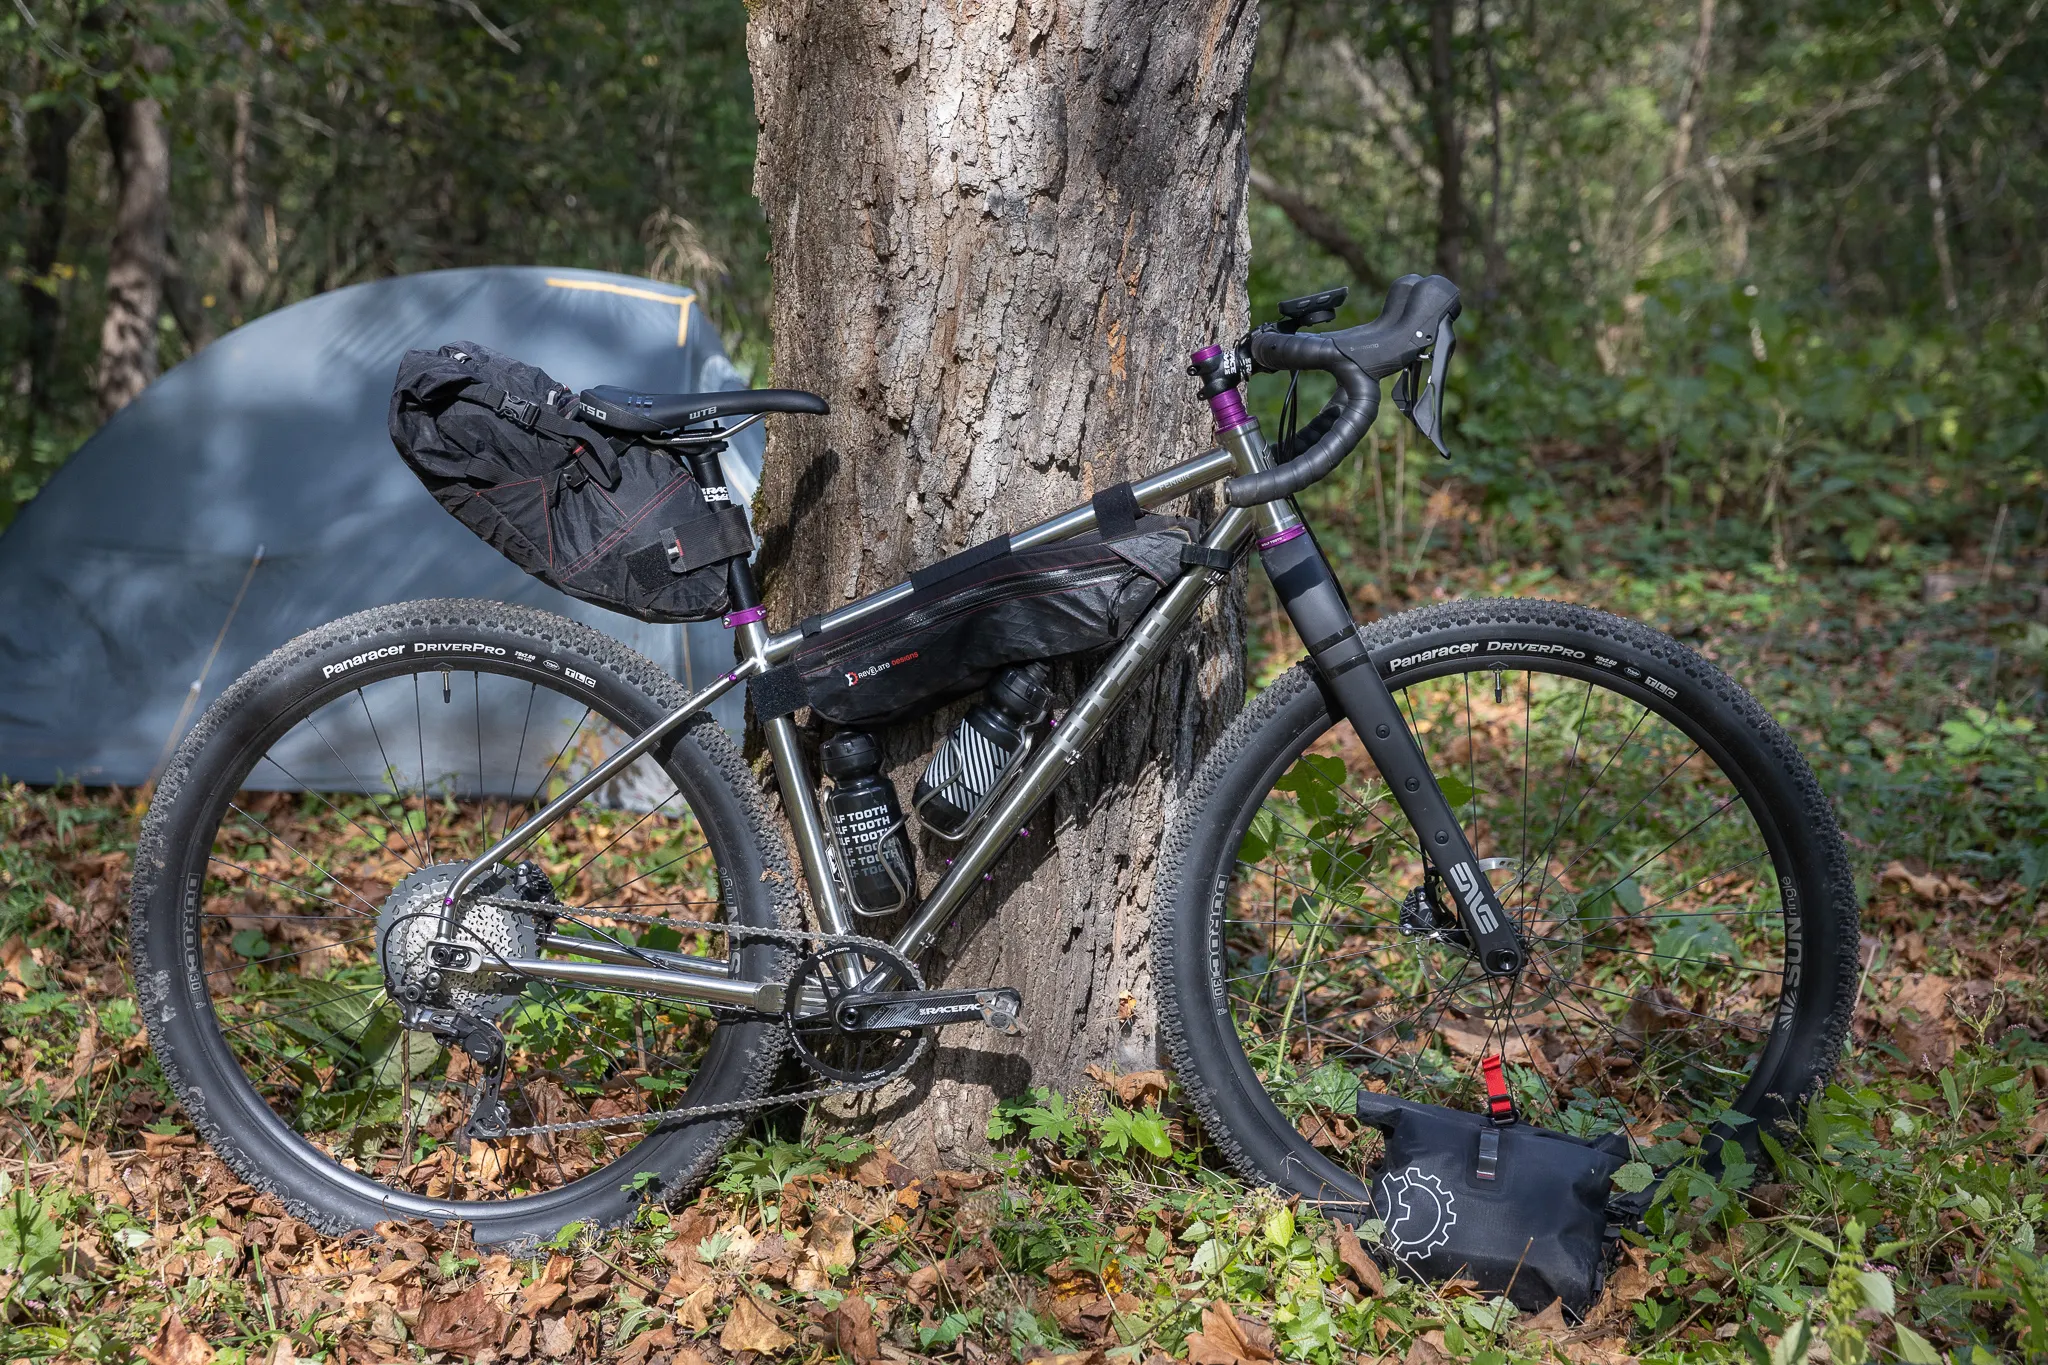 Otso Cycles Fenrir Stainless is a ride-anywhere bike for bikepacking races and afternoon adventures that can be built with drop bars or MTB bars.